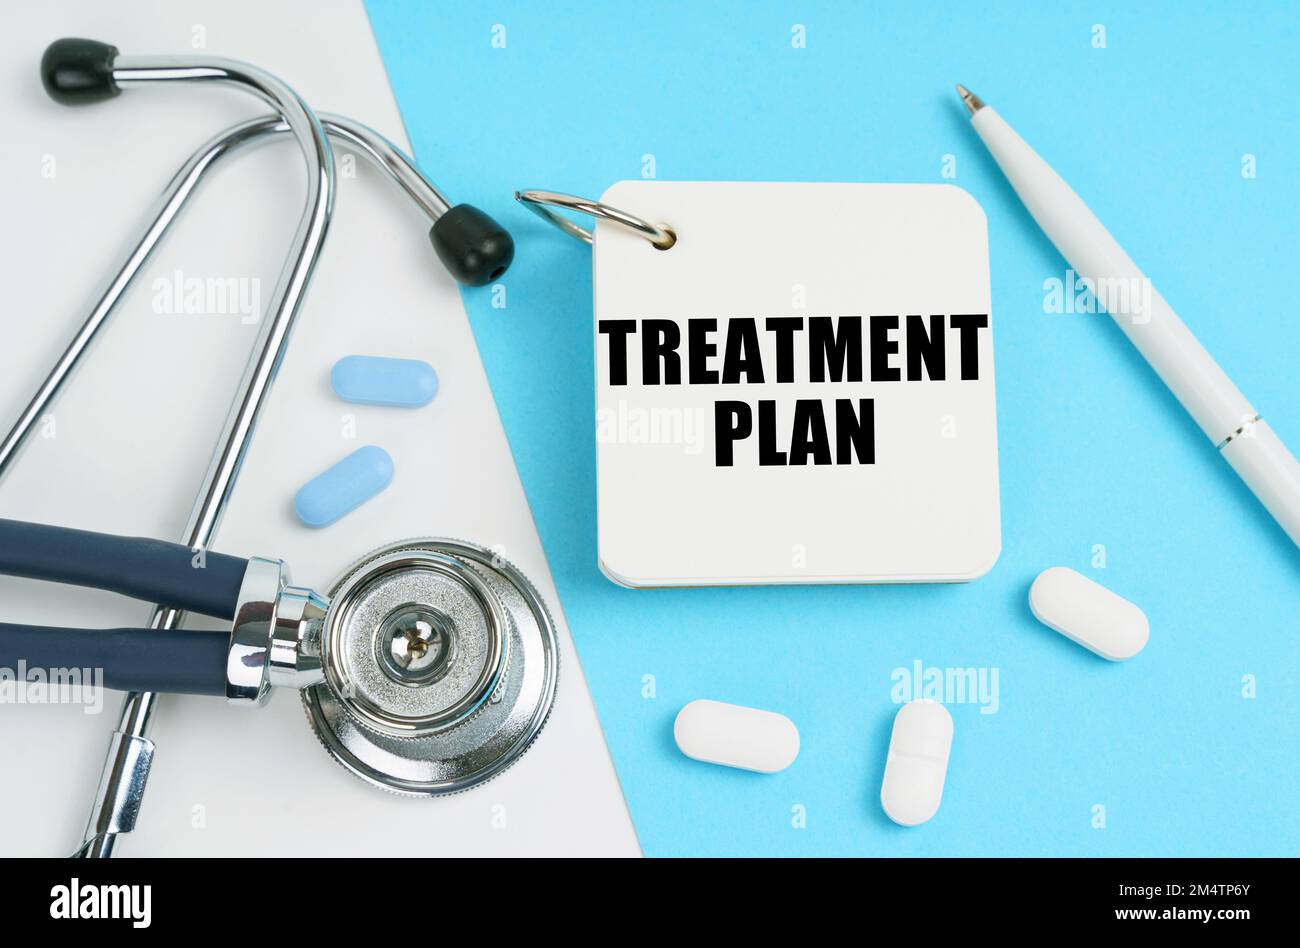 Medical concept. On a white and blue surface are pills, a stethoscope, a pen and a notepad with the inscription - TREATMENT PLAN Stock Photo